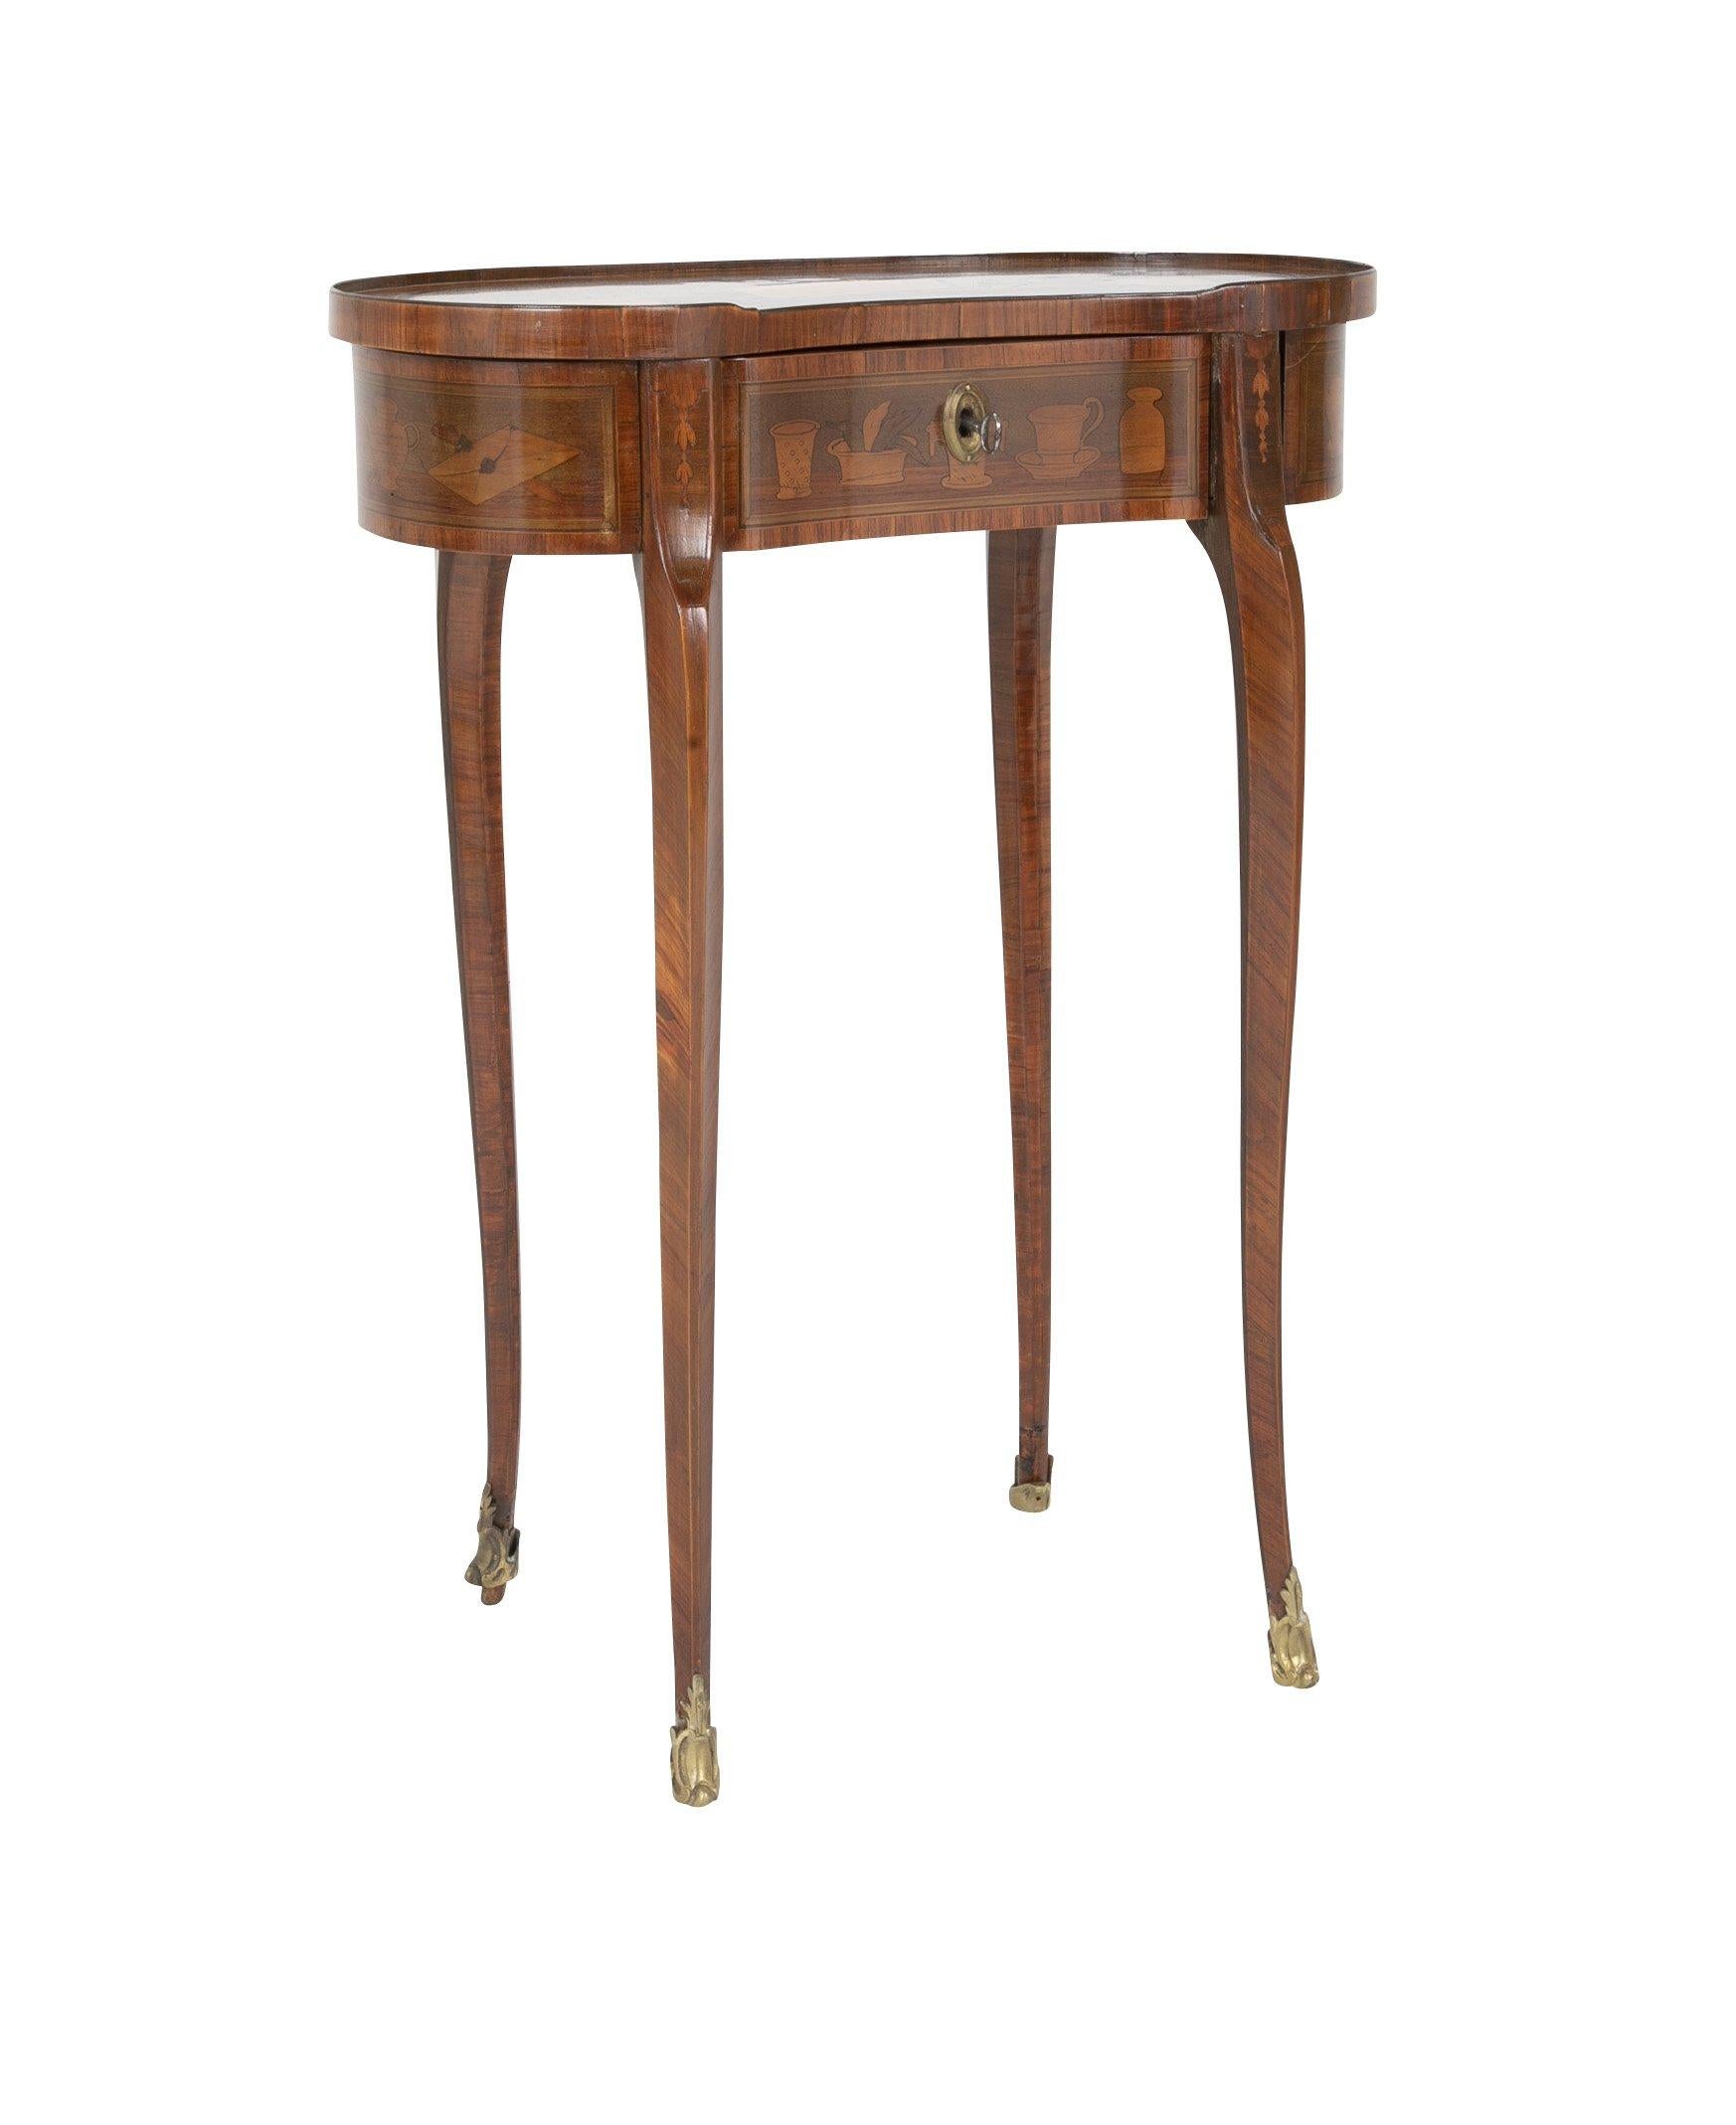 Unusual Louis XV kidney form marquetry table with mechanical side drawers after Charles Topino, circa 1770s.